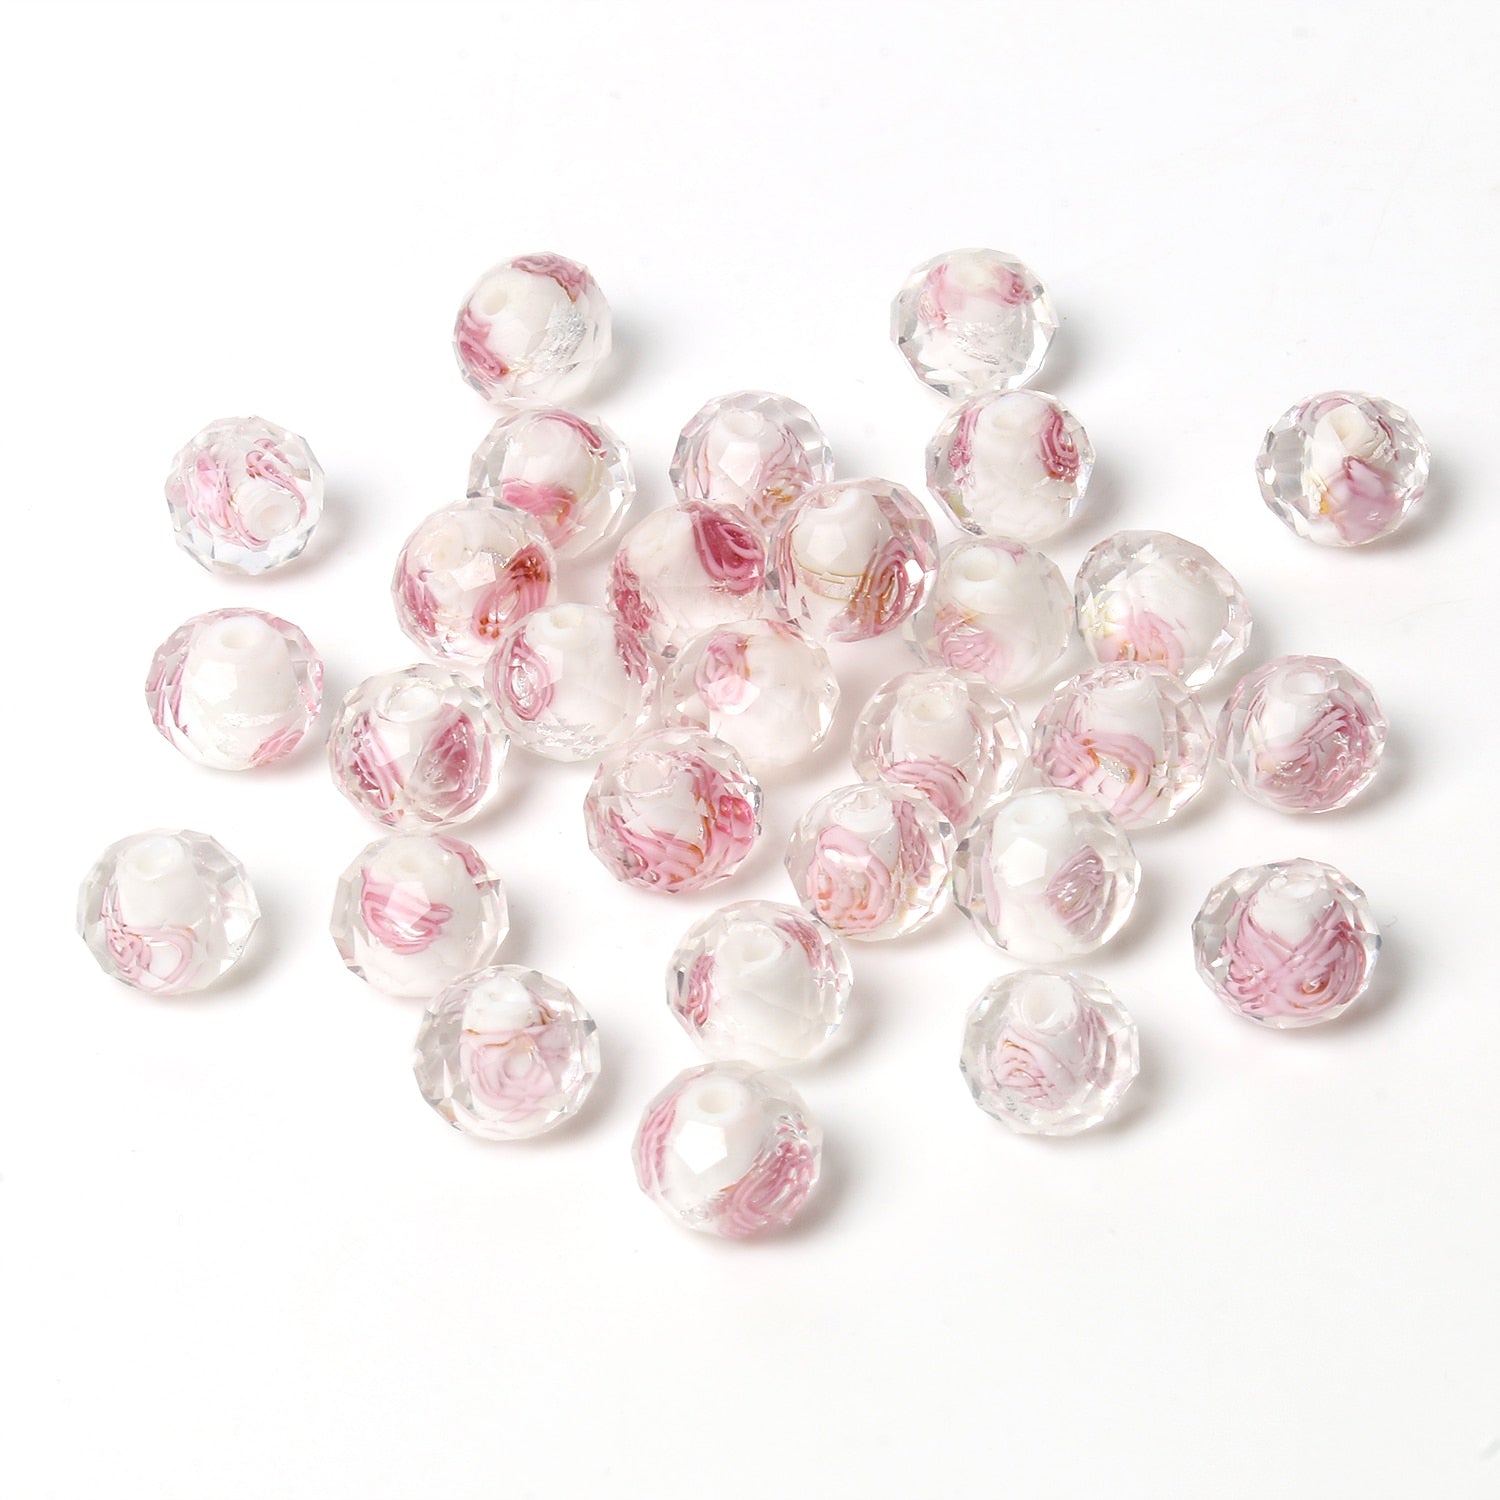 Ten Murano Lampwork Crystal Faceted Glass Beads Pink White Flower for DIY Jewellery Making